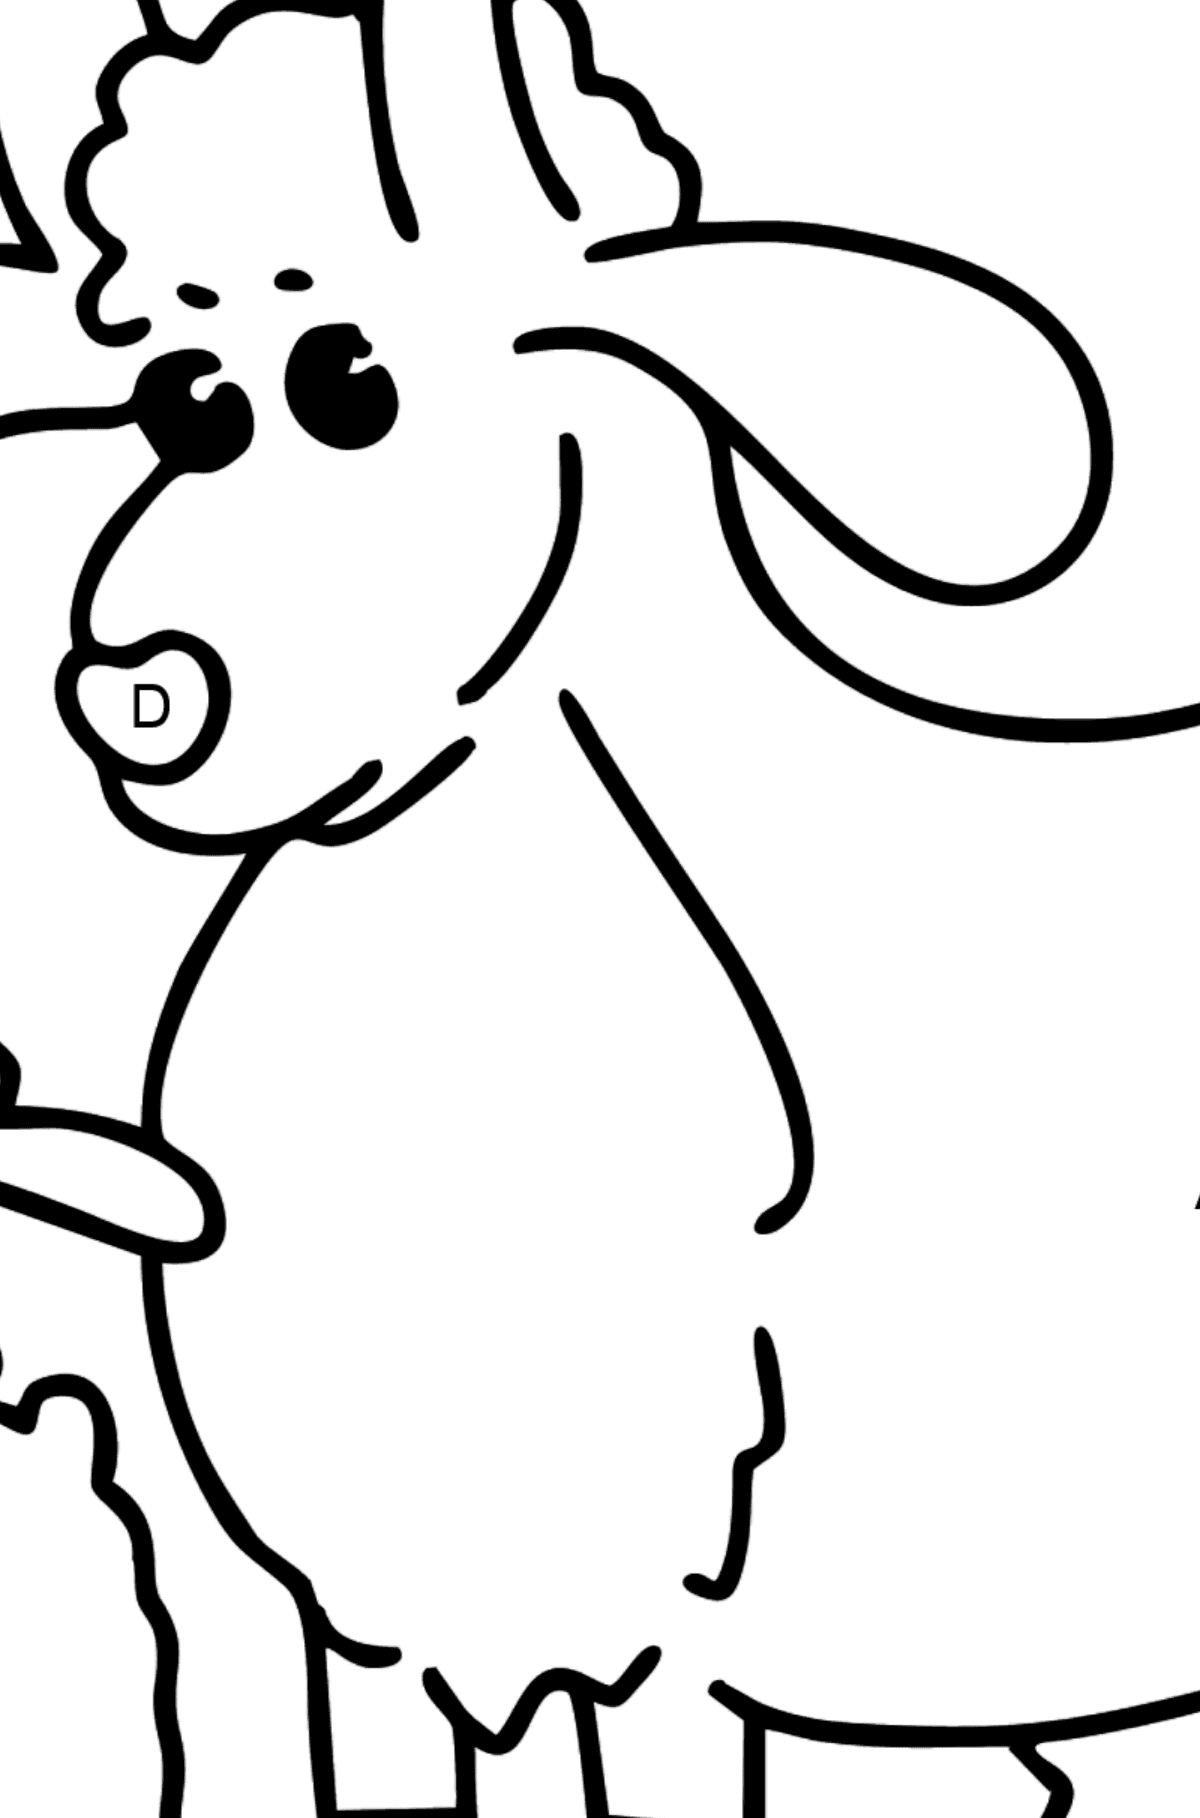 Goat and Kid coloring page - Coloring by Letters for Kids